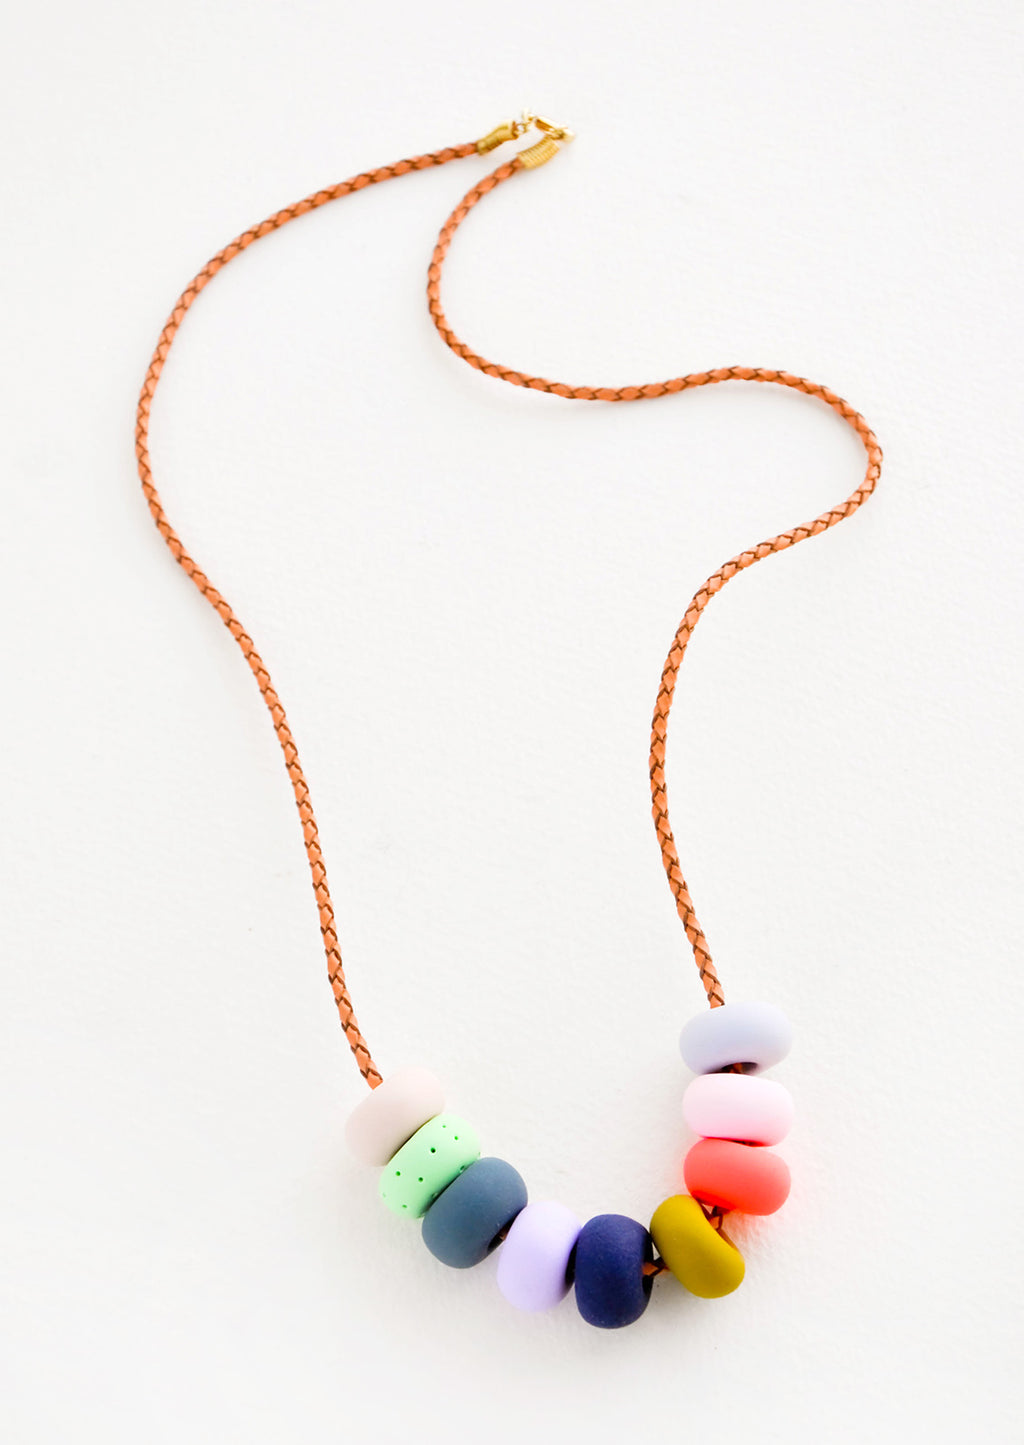 Summer Fair: Woven leather cord necklace with gold clasp and rounded clay beads red, blue, lime green and mustard yellow.